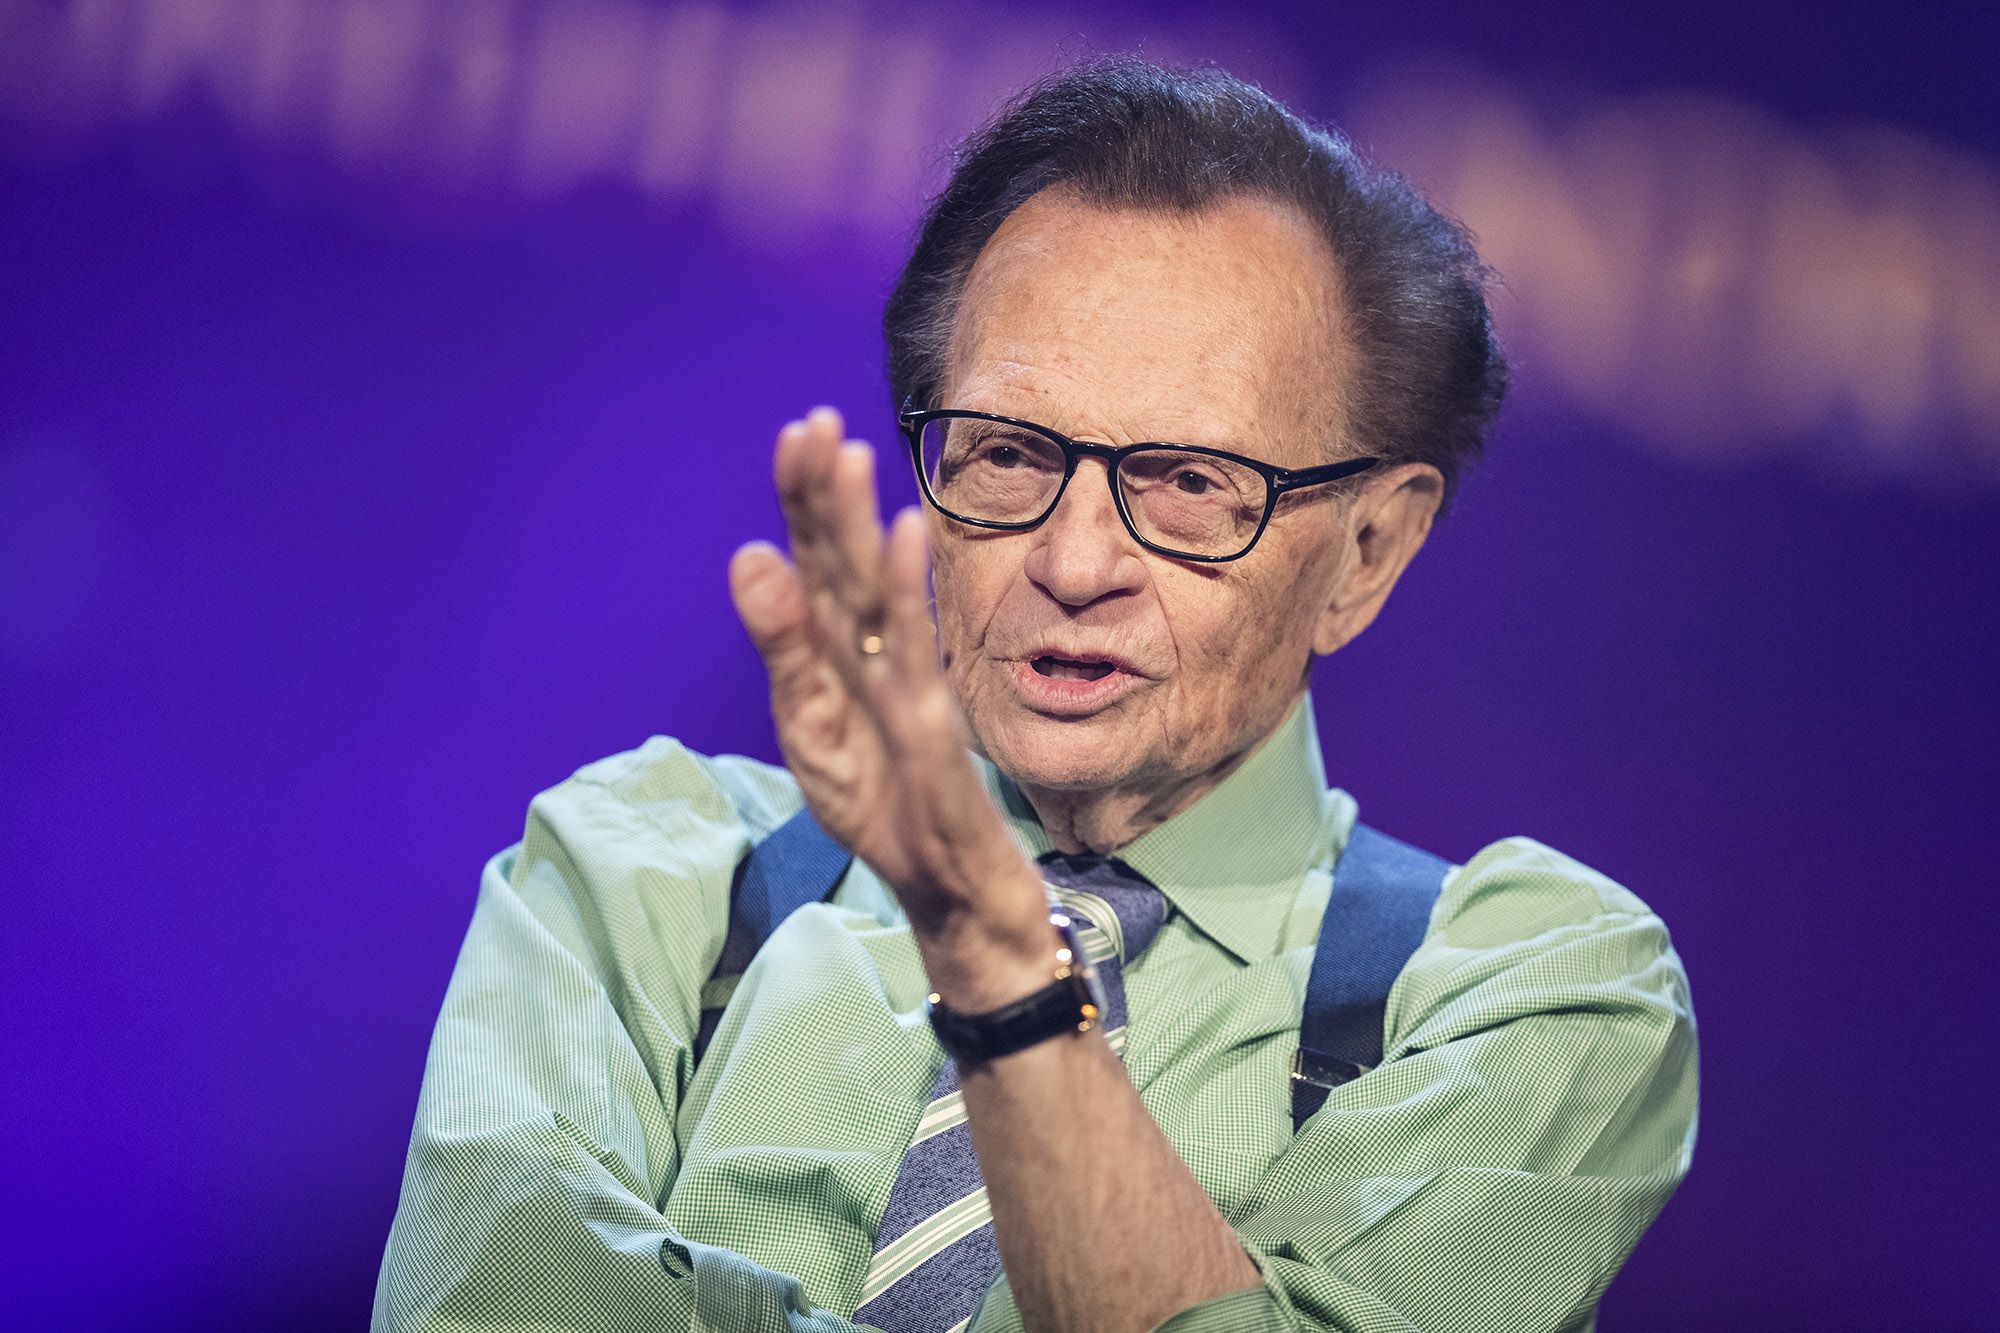 Larry King murió a los 87 años (Michael Campanella/Getty Images)